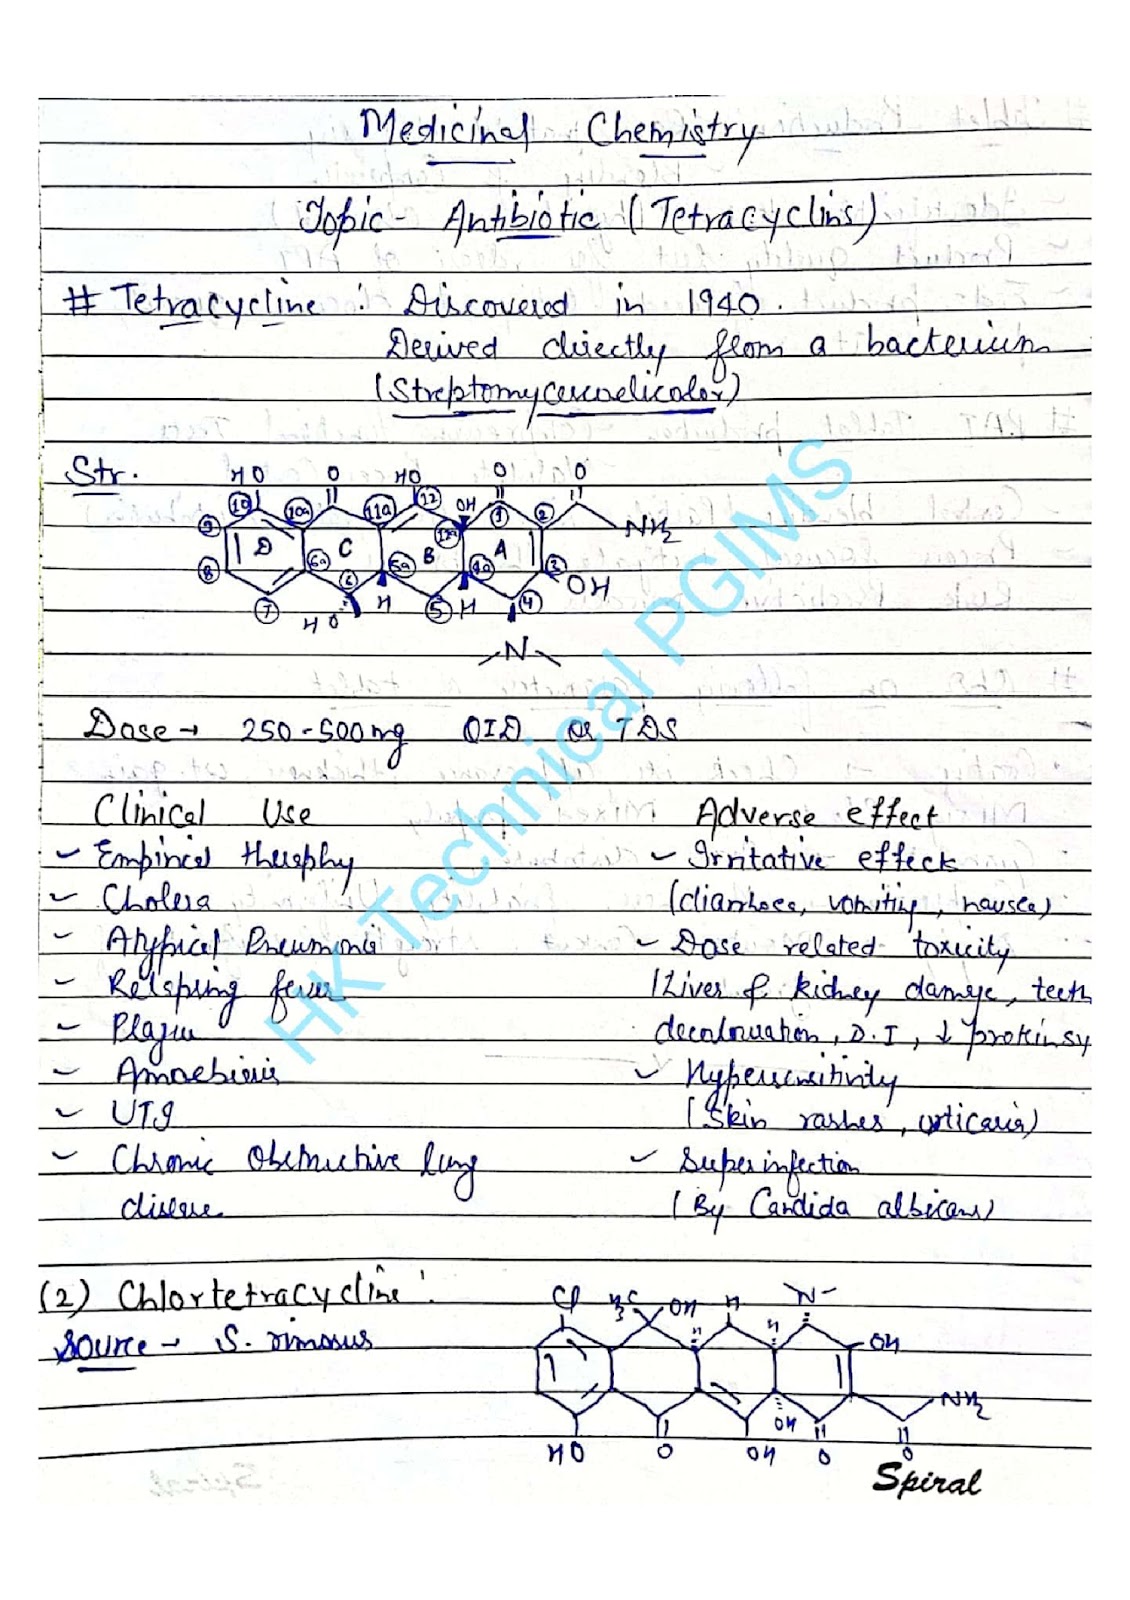 Tetracycline Handwritten Note PDF Download 6th Semester B.Pharmacy Lecture Notes,BP601T Medicinal chemistry III,BPharmacy,Handwritten Notes,BPharm 6th Semester,Important Exam Notes,